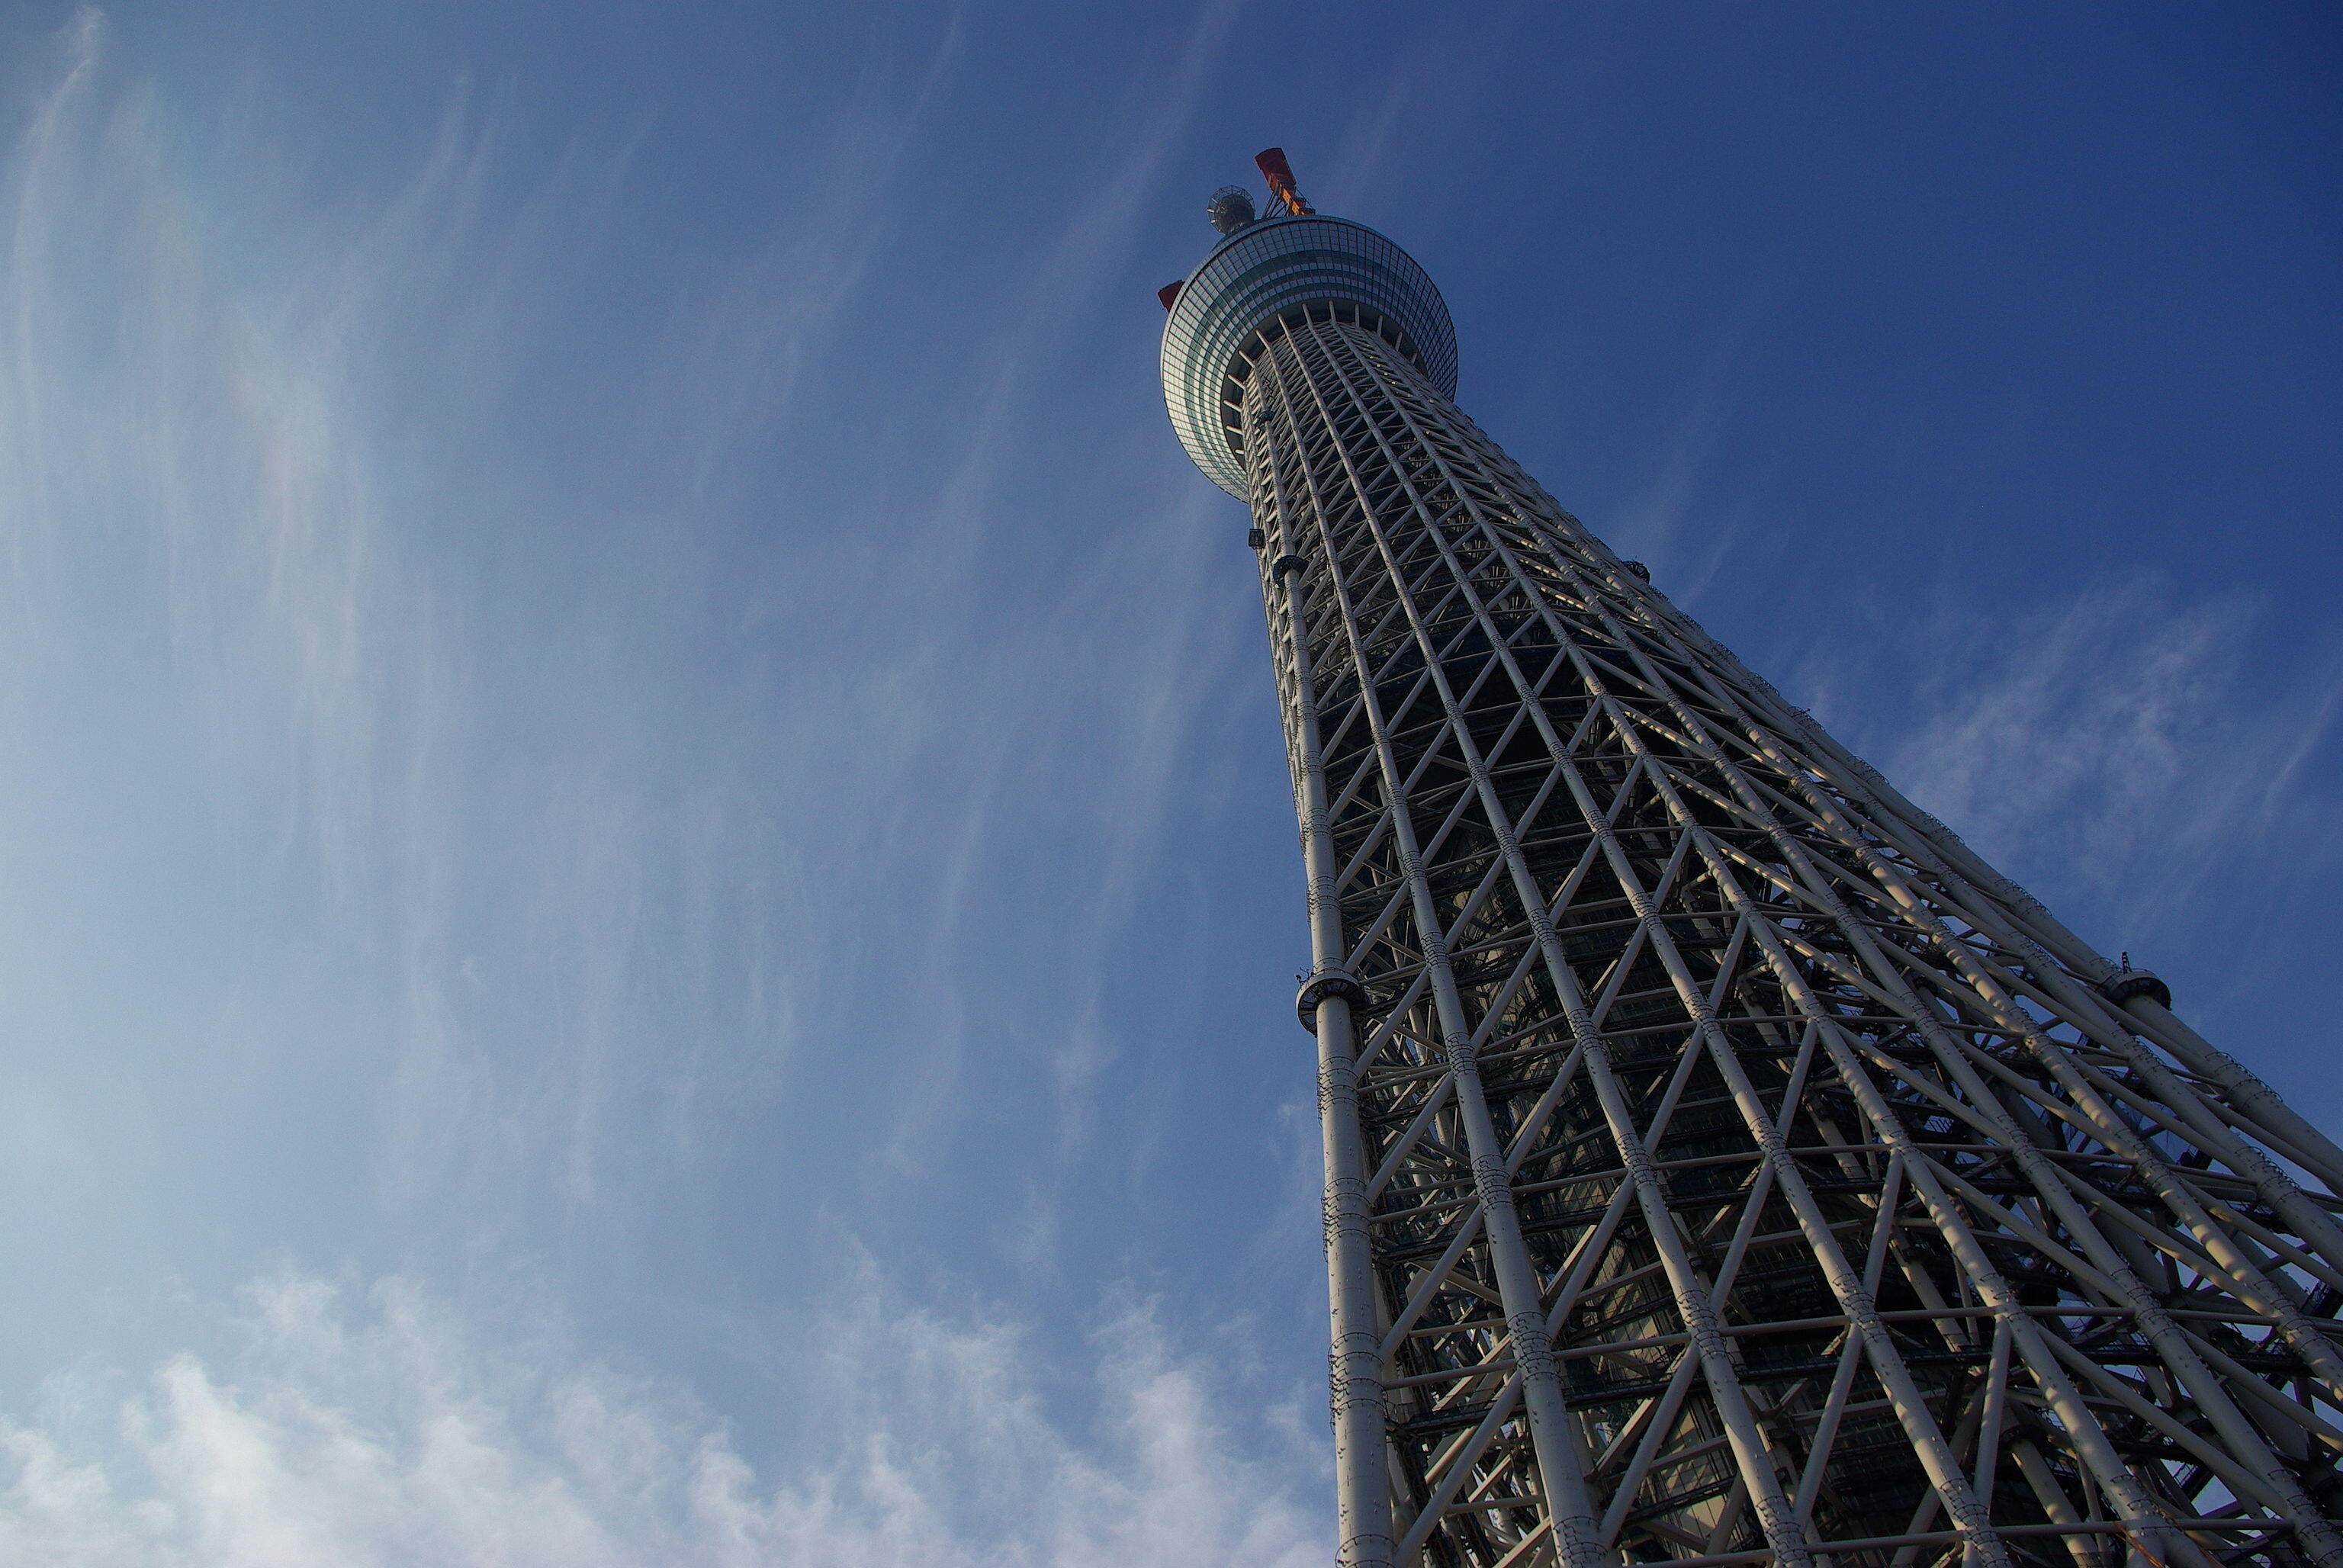 The Tokyo Sky tree is still under construction when picture was taken, stands 634m. It is the worlds tallest broadcast tower in the world.